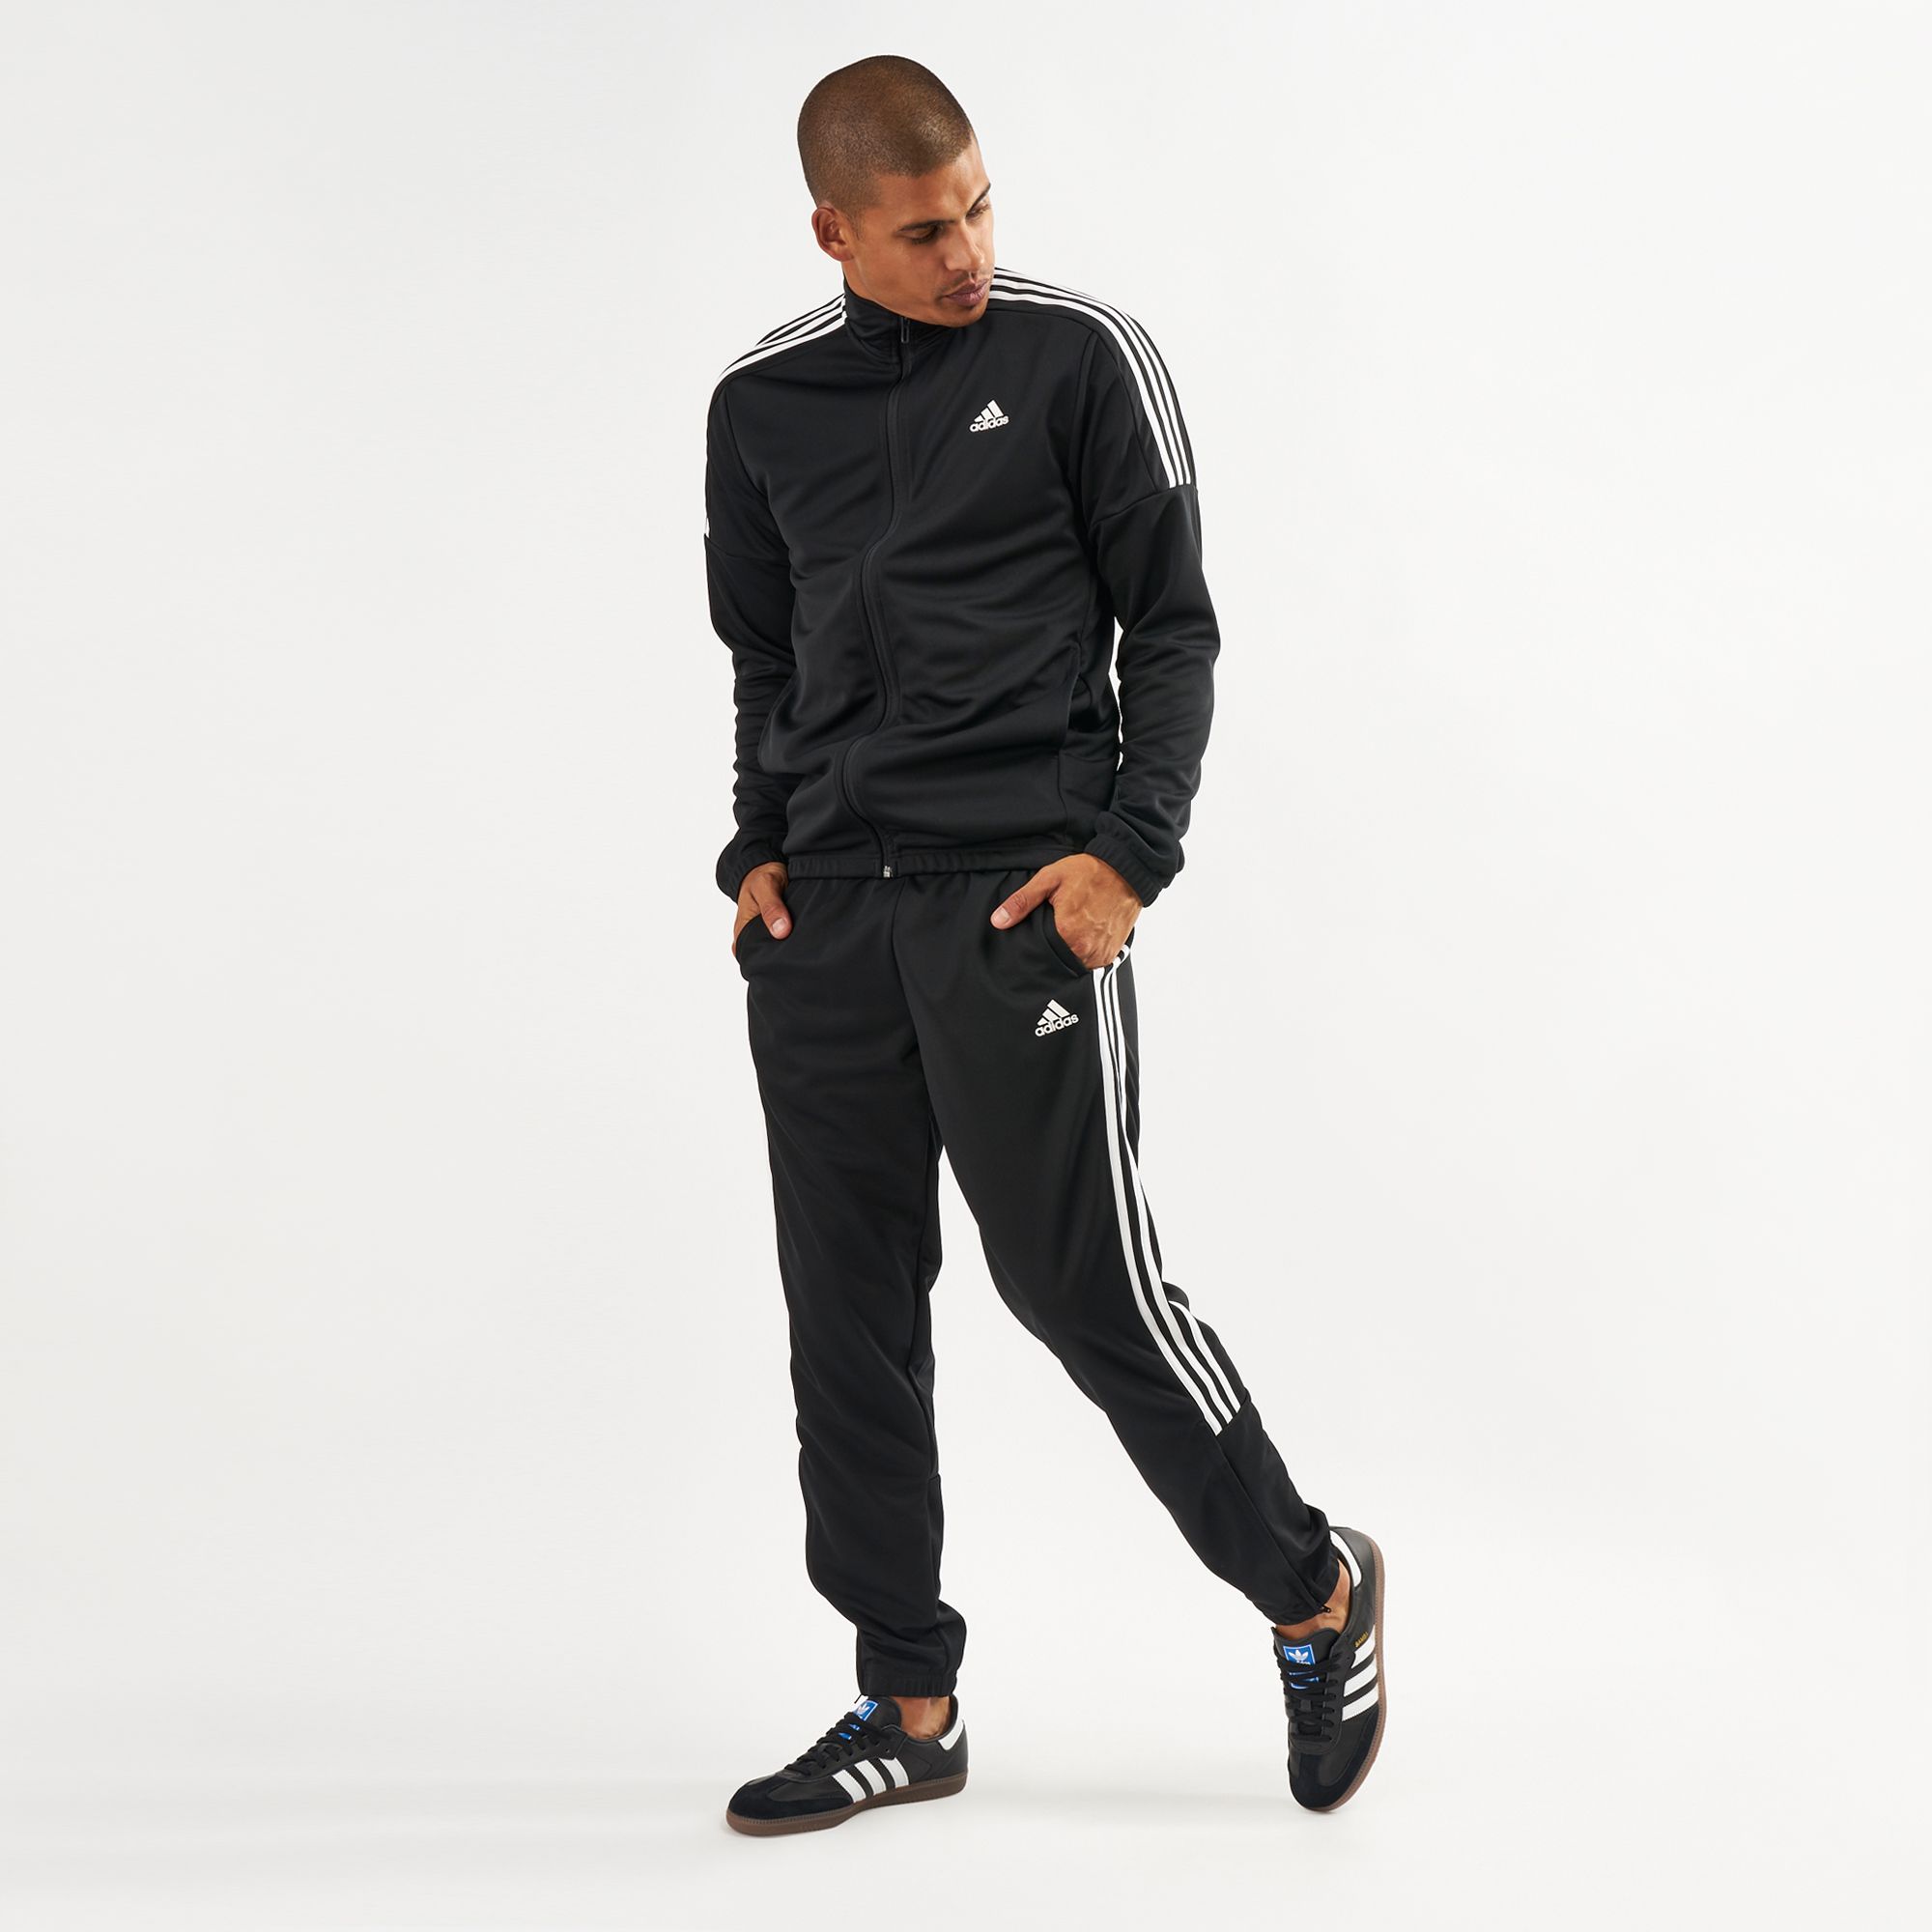 Adidas Men's Team Sports Track Suit Tracksuits Clothing Mens